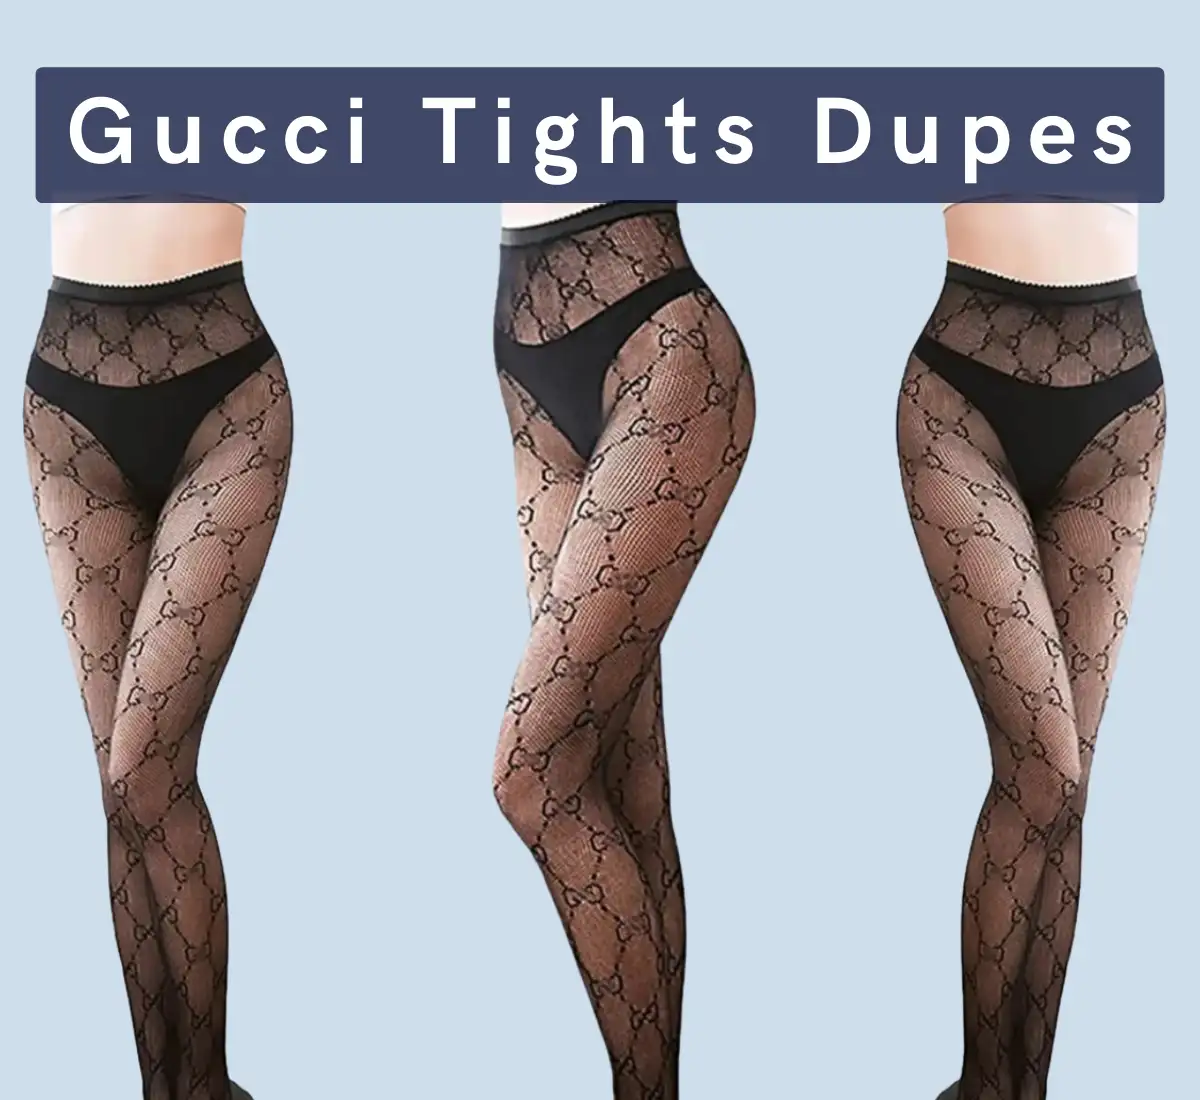 2 best gucci tights dupe (under $25)